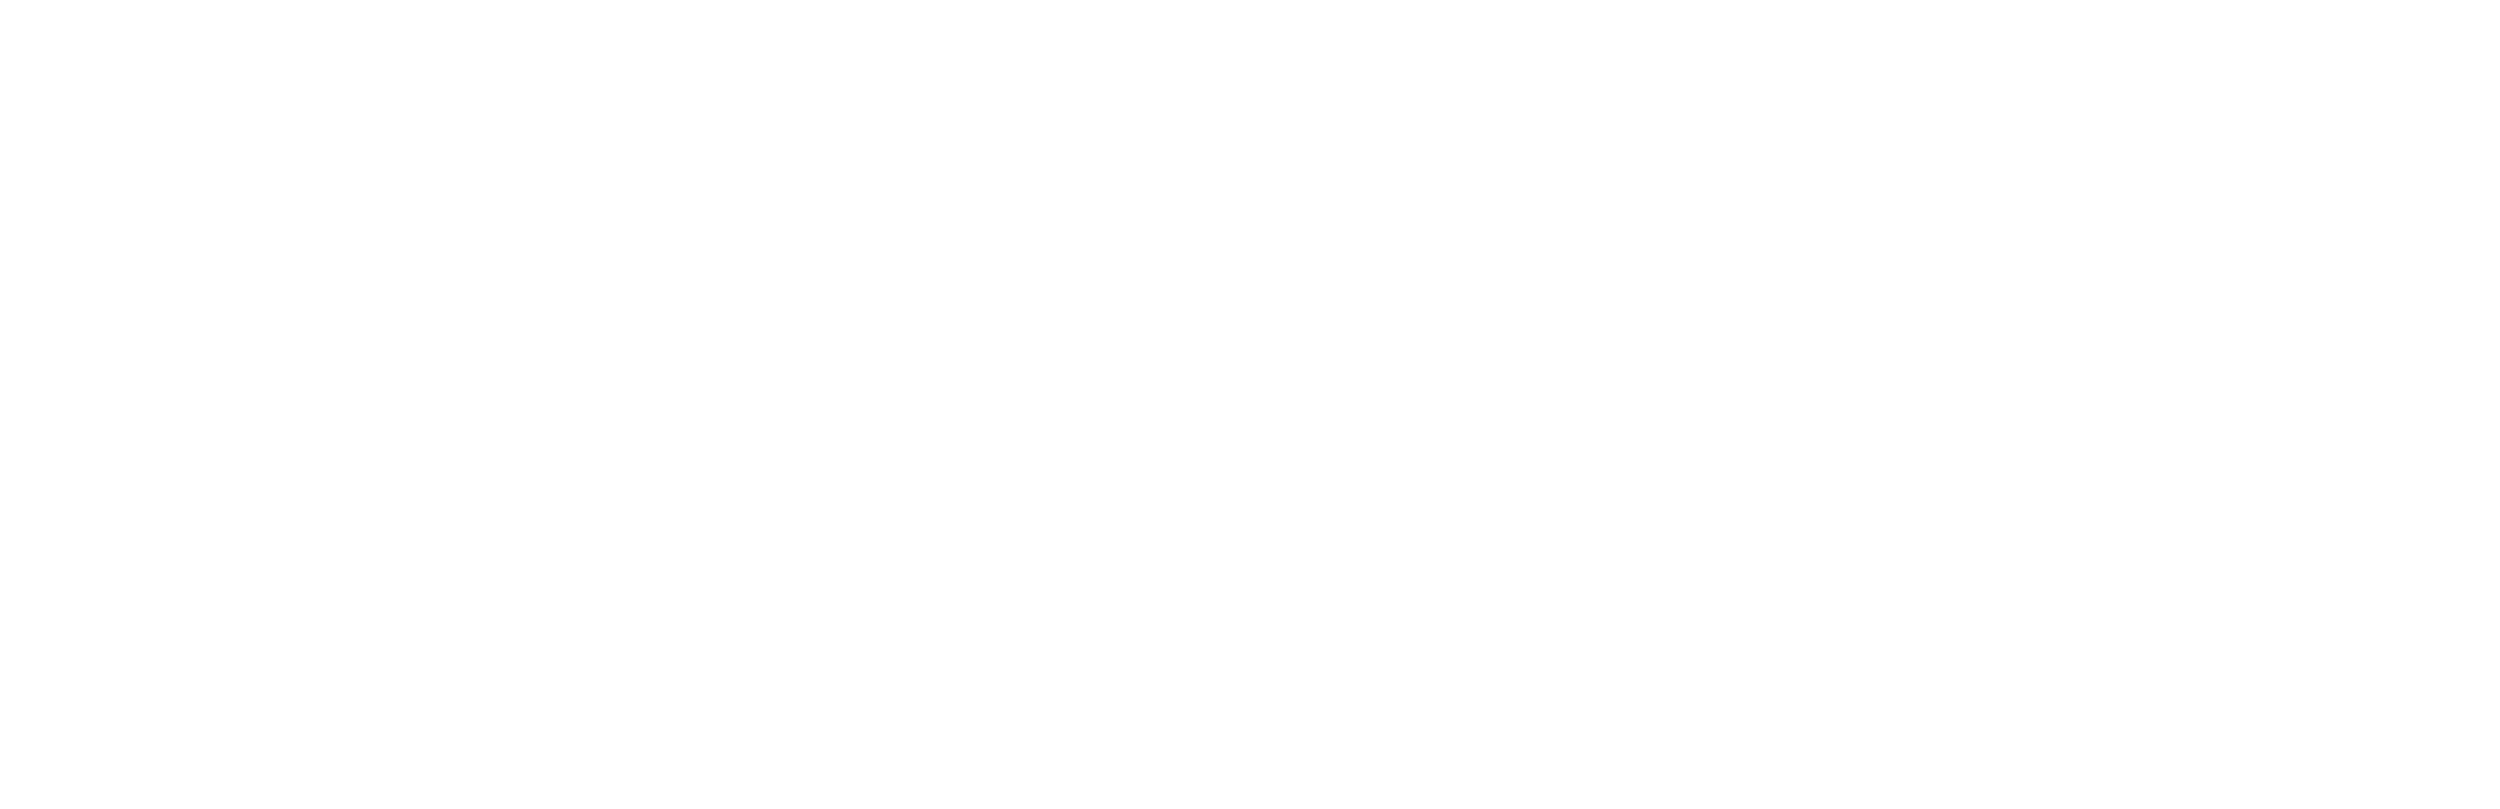 Troxclair Residential Group